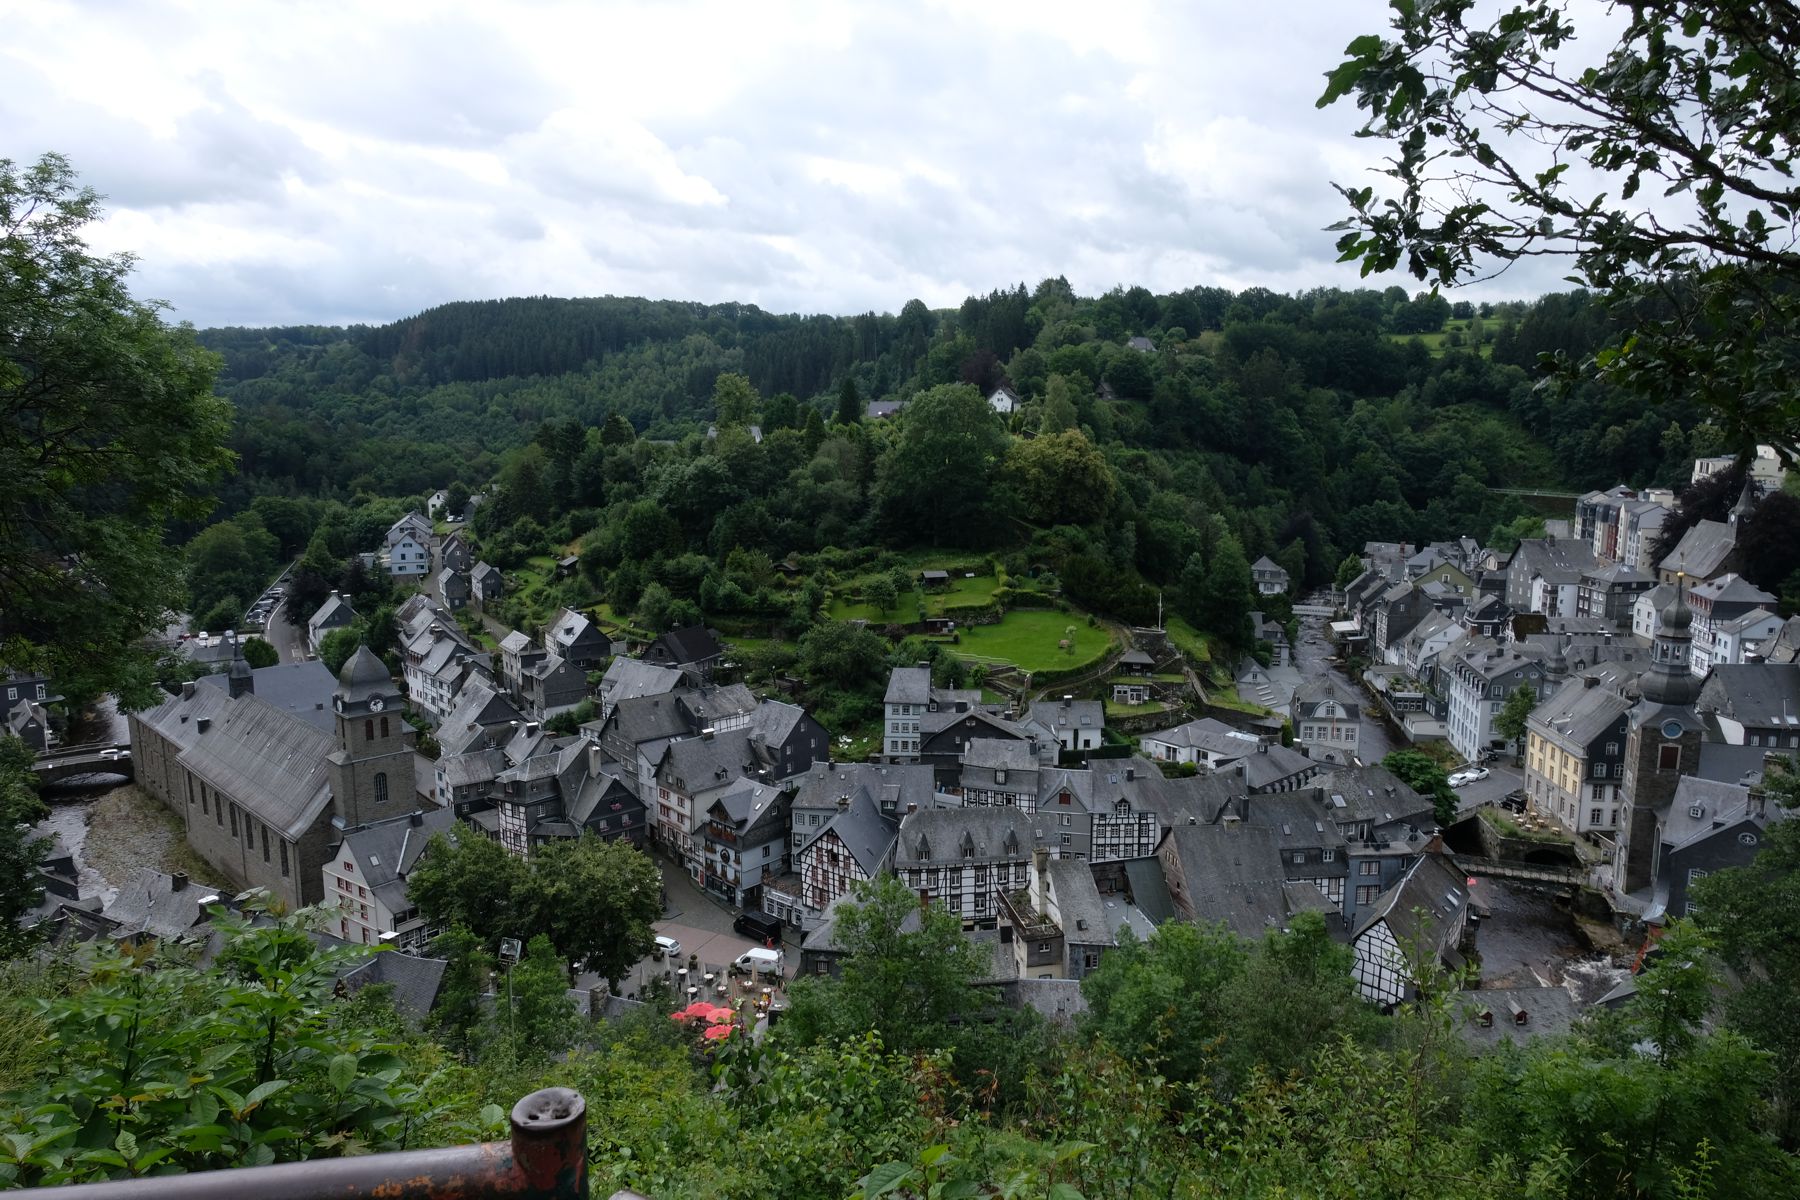 View of Monschau from footpath.